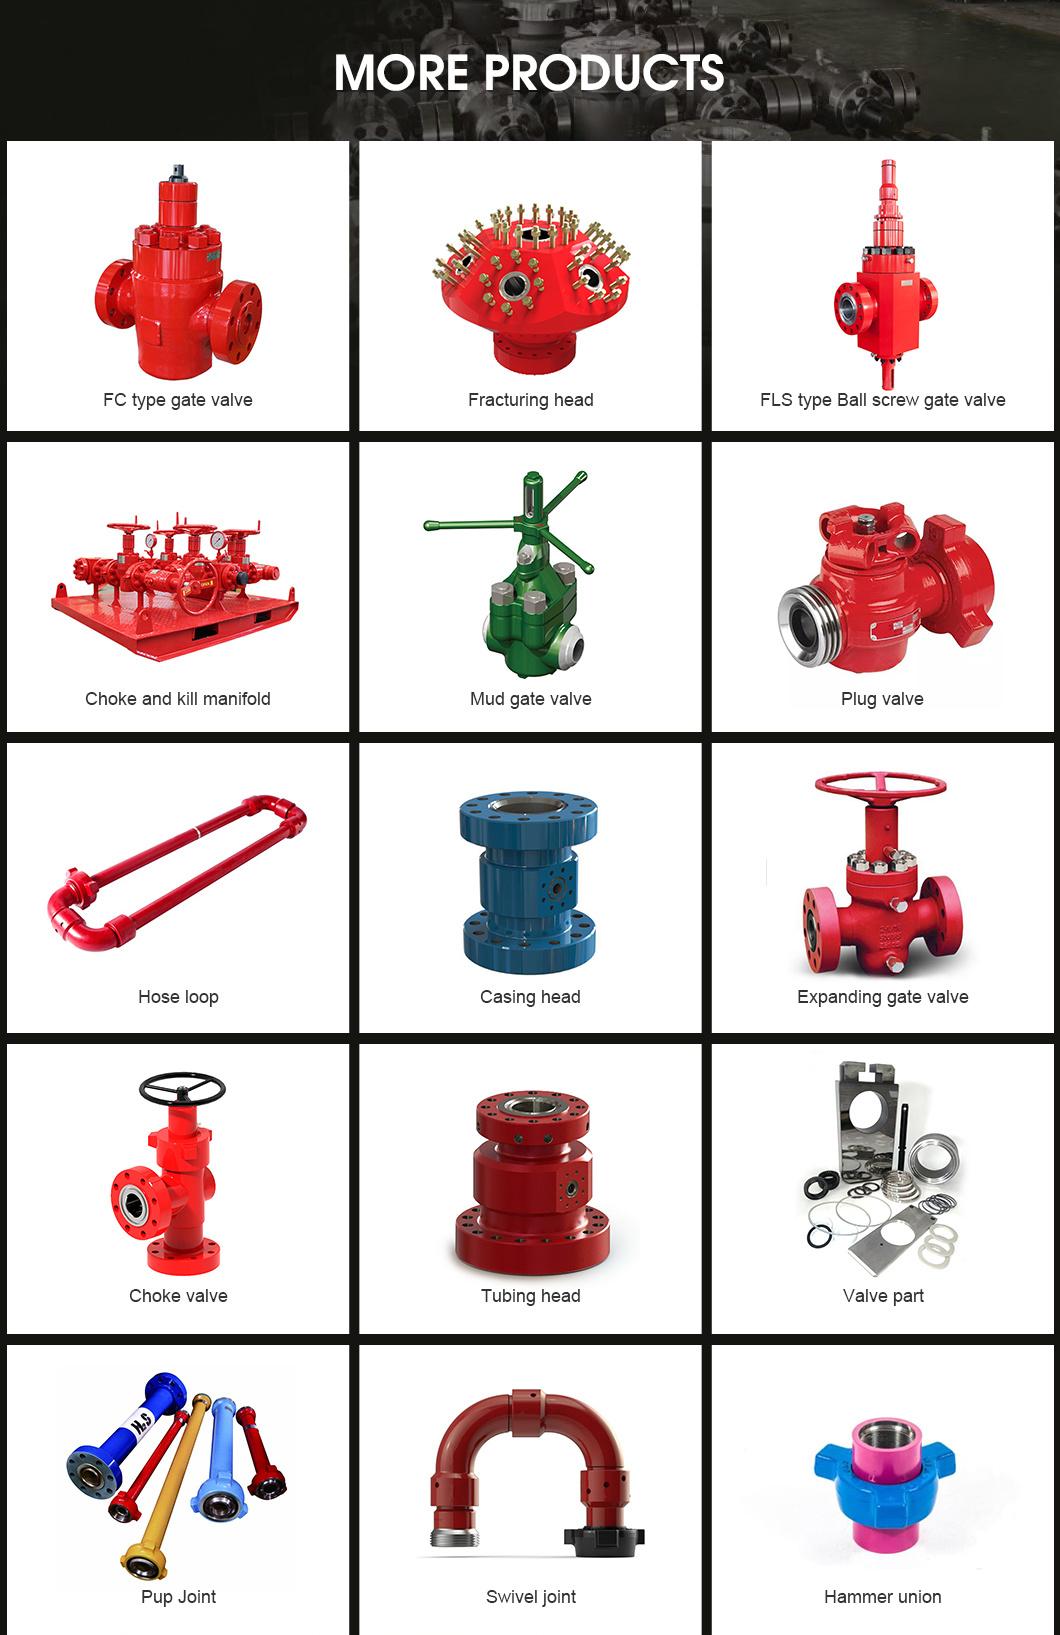 API 6A Demco 2"Mud Gate Valve with Rubber Seals